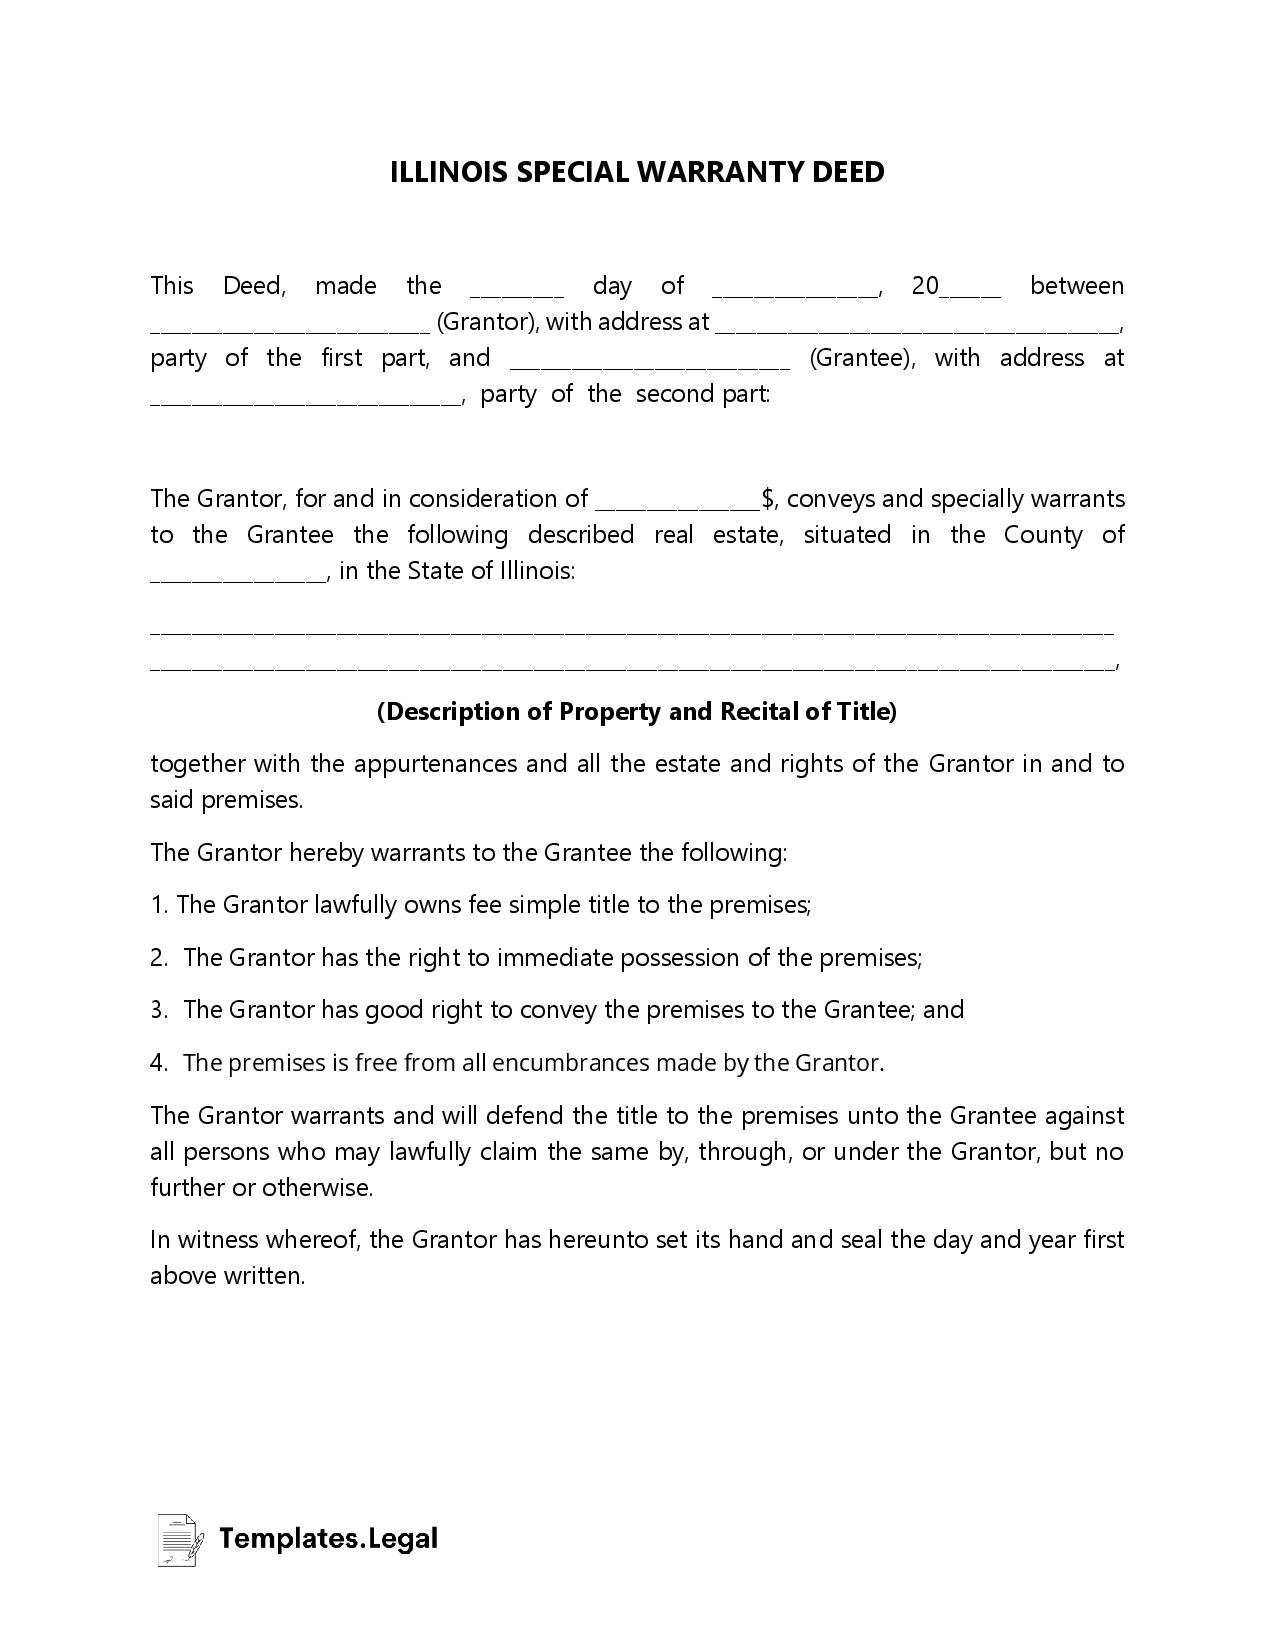 Illinois Special Warranty Deed - Templates.Legal